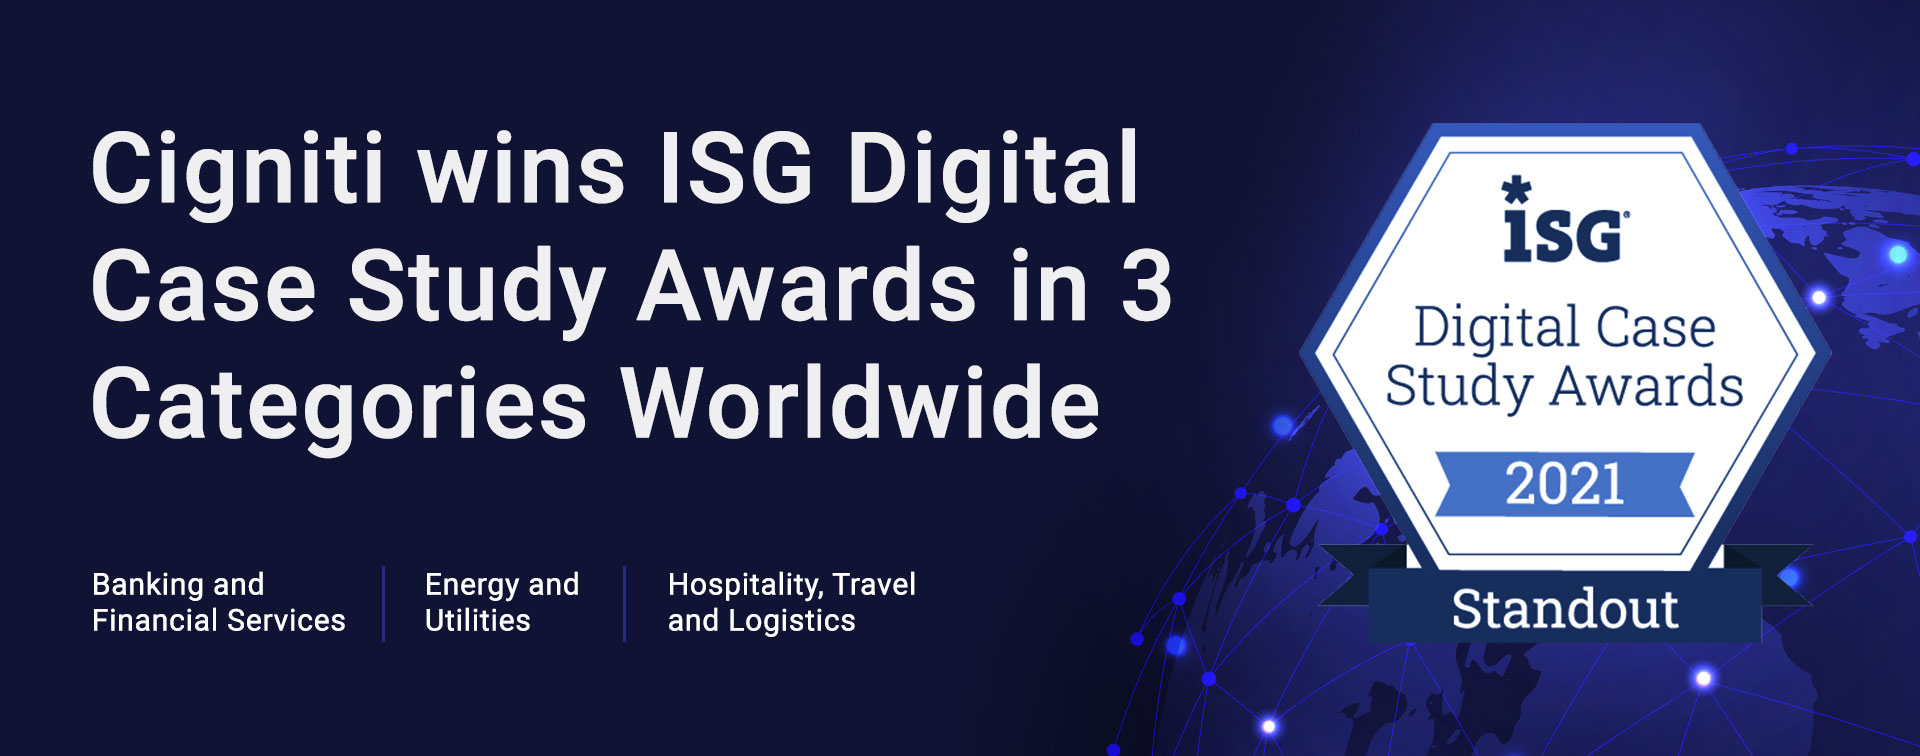 Cigniti Technologies Recognized as the Winner of the ISG Digital Case Study Awards